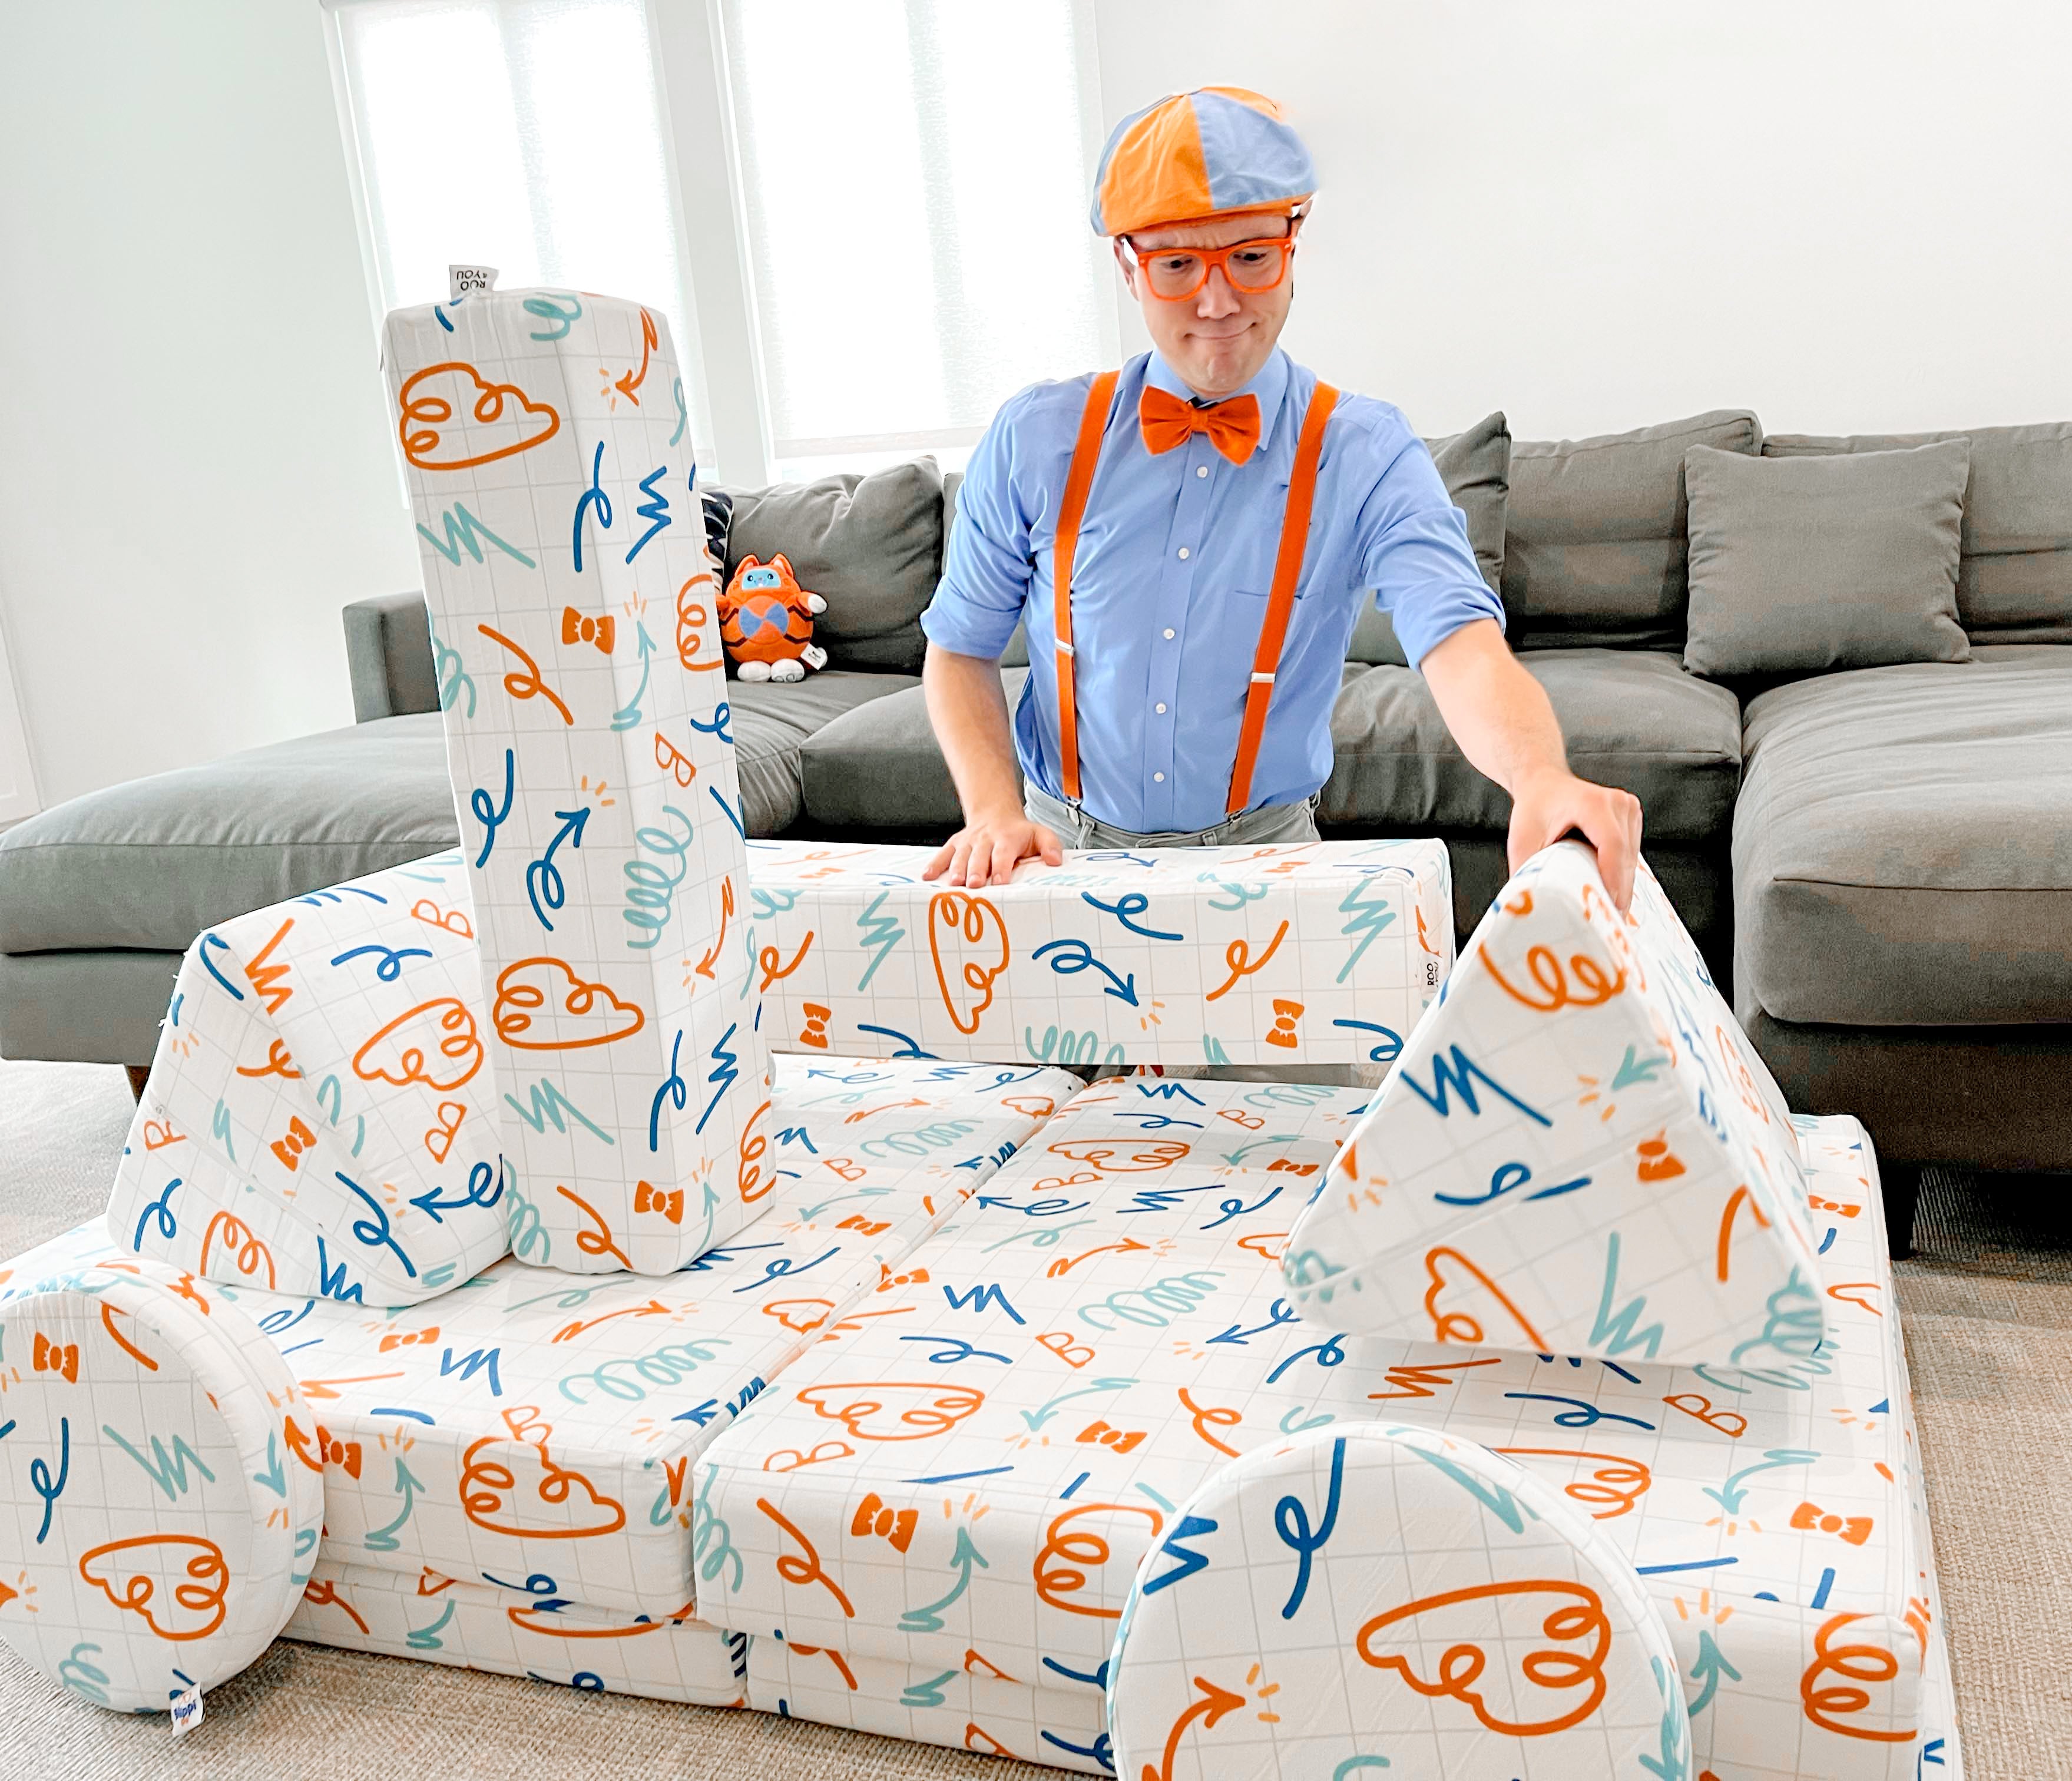 Blippi making a car with a play couch